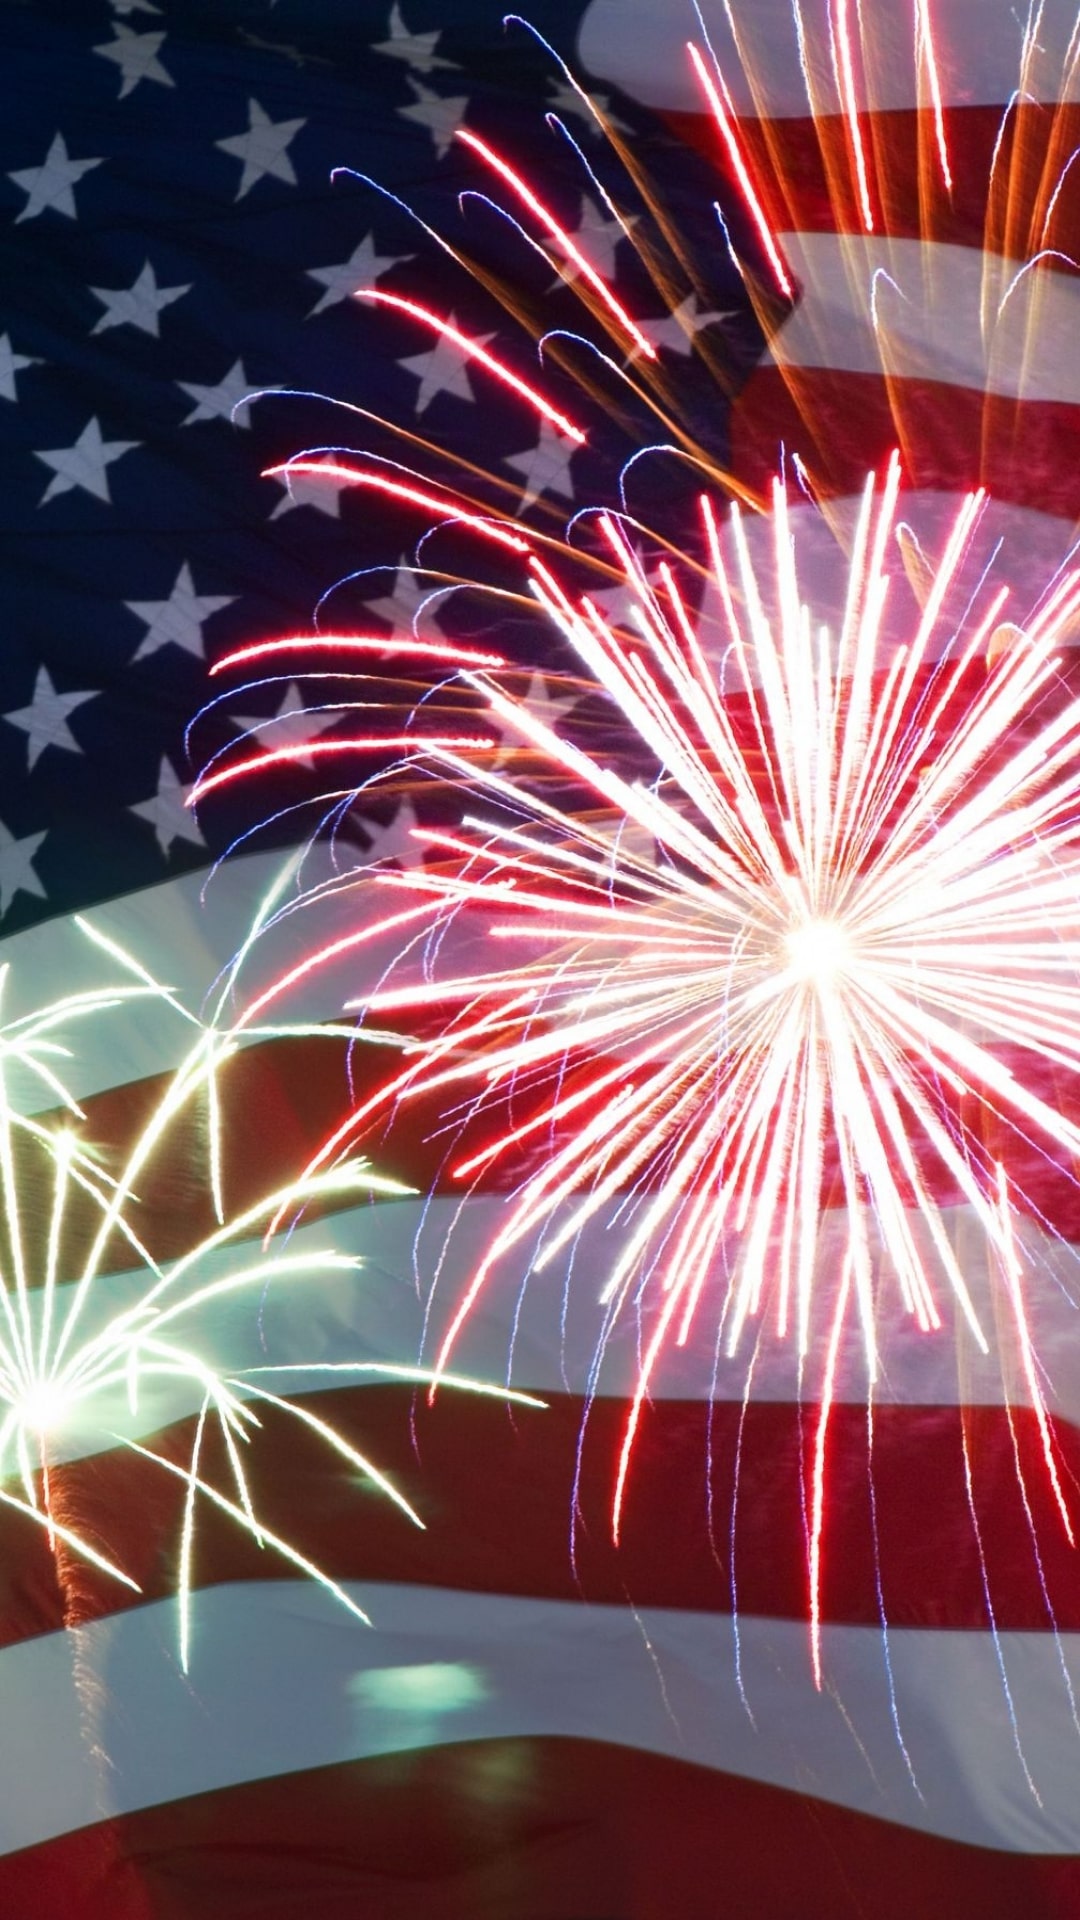 4th of July Backgrounds to Light Up Your Screens!